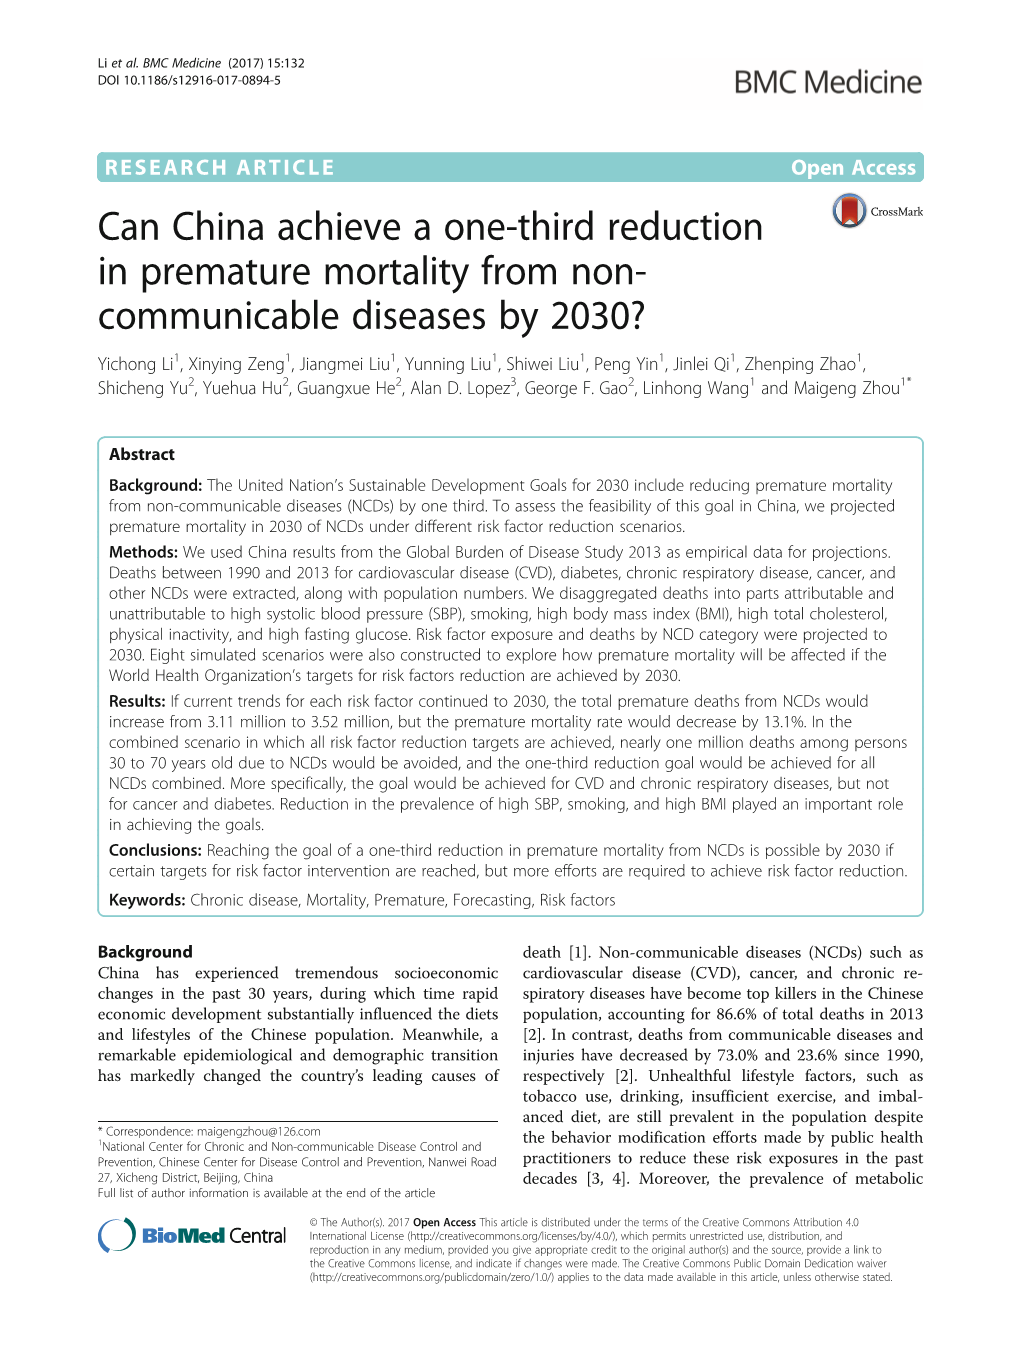 Can China Achieve a One-Third Reduction in Premature Mortality